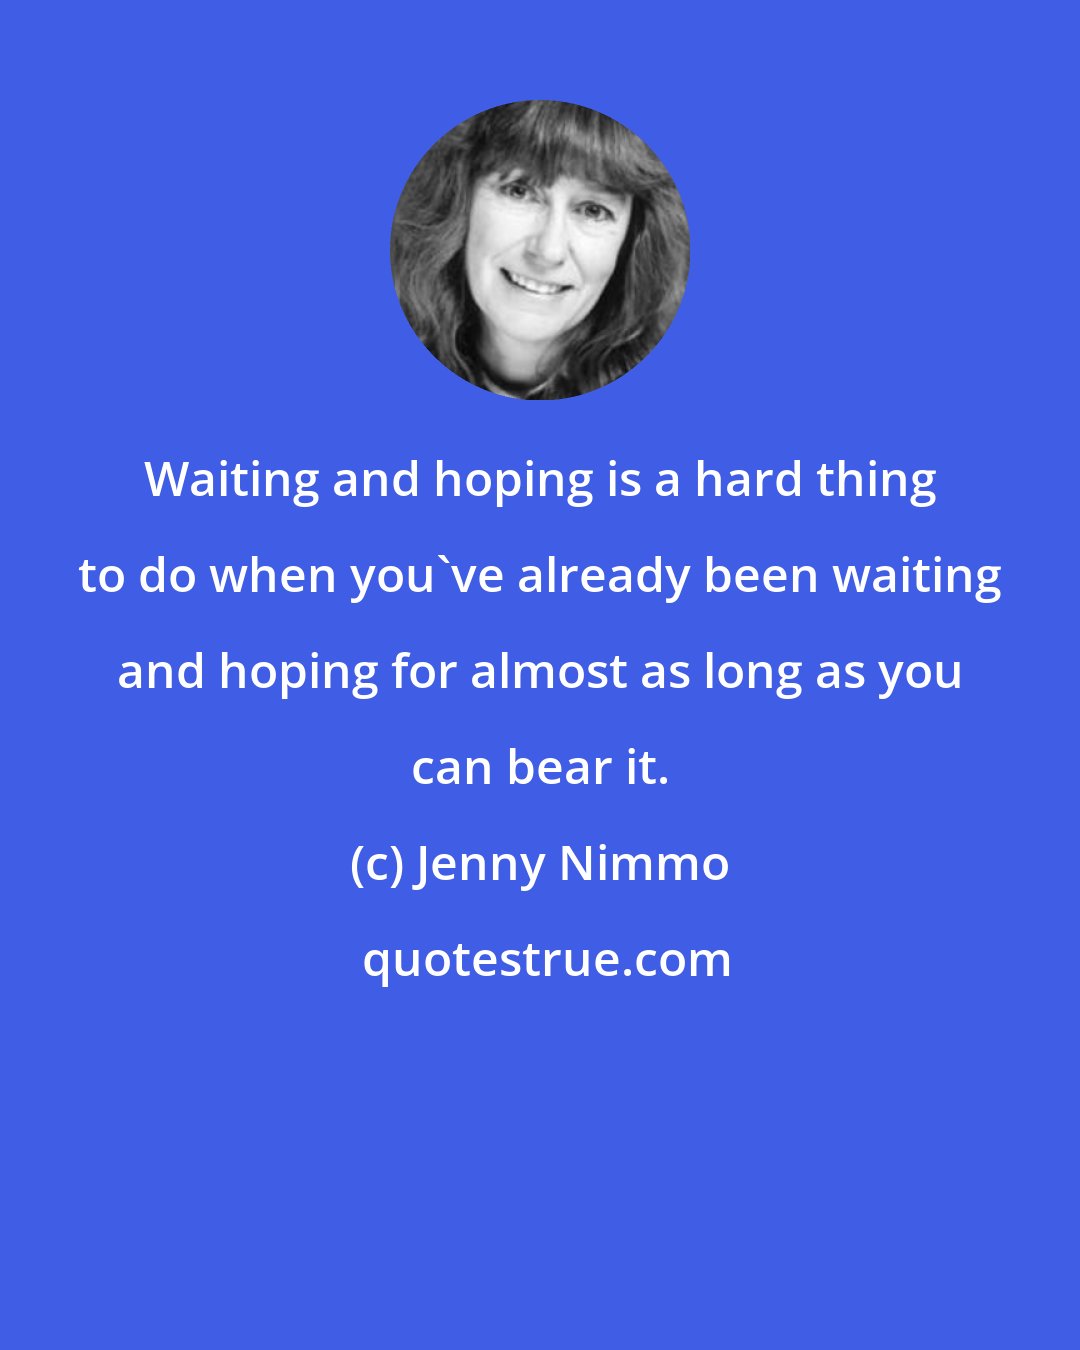 Jenny Nimmo: Waiting and hoping is a hard thing to do when you've already been waiting and hoping for almost as long as you can bear it.